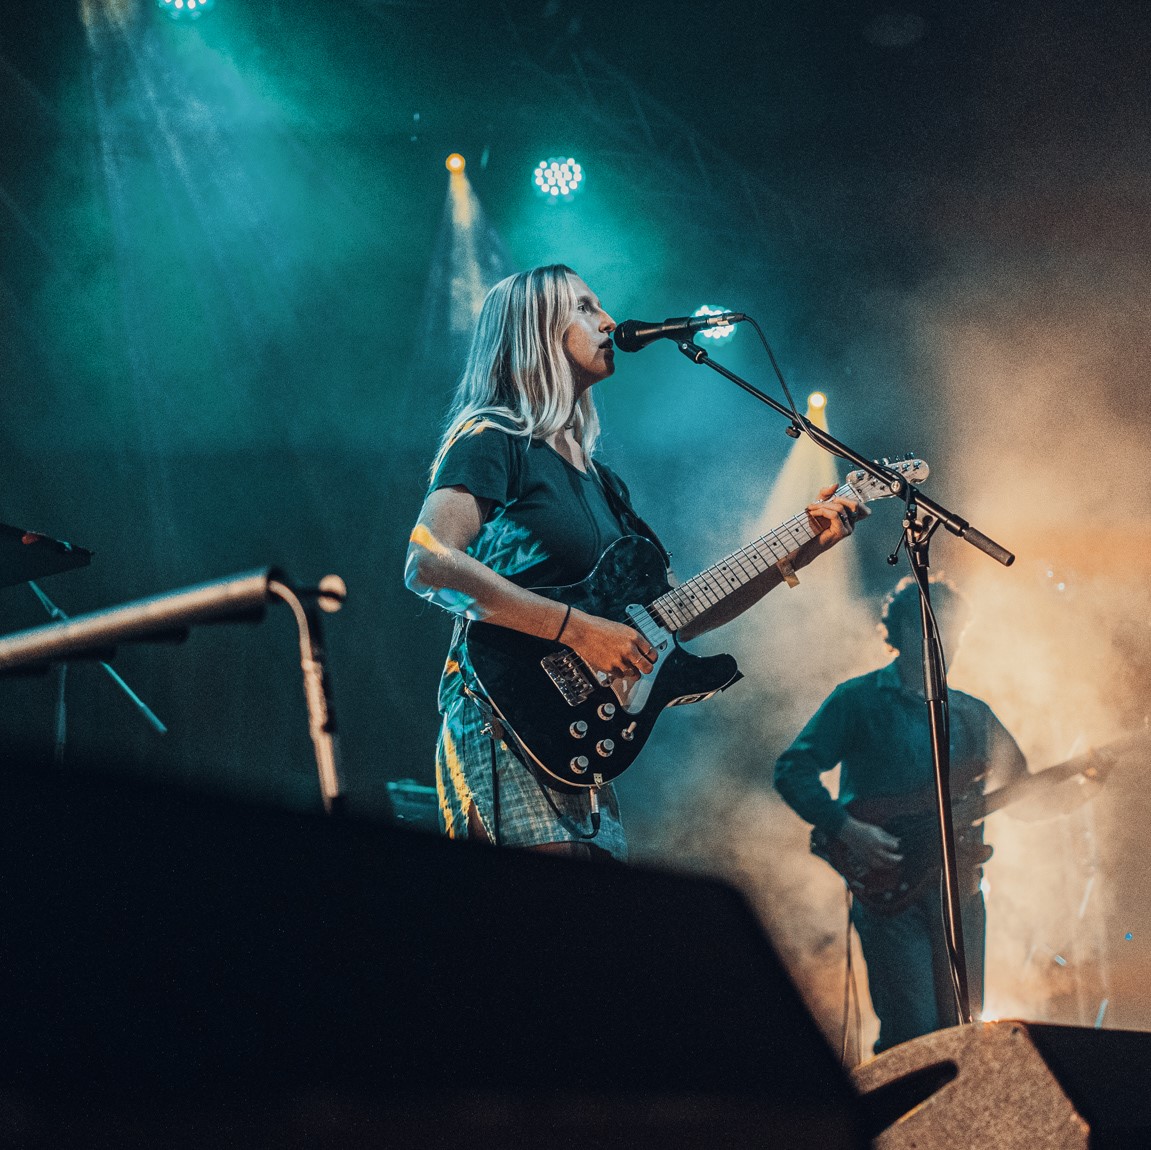 Tranquility in the form of @billiemarten's gorgeous folk sounds was a perfect moment on a busy day. 📷: @jadekmedia #billiemarten #thelevel #ntsu #d2dfest